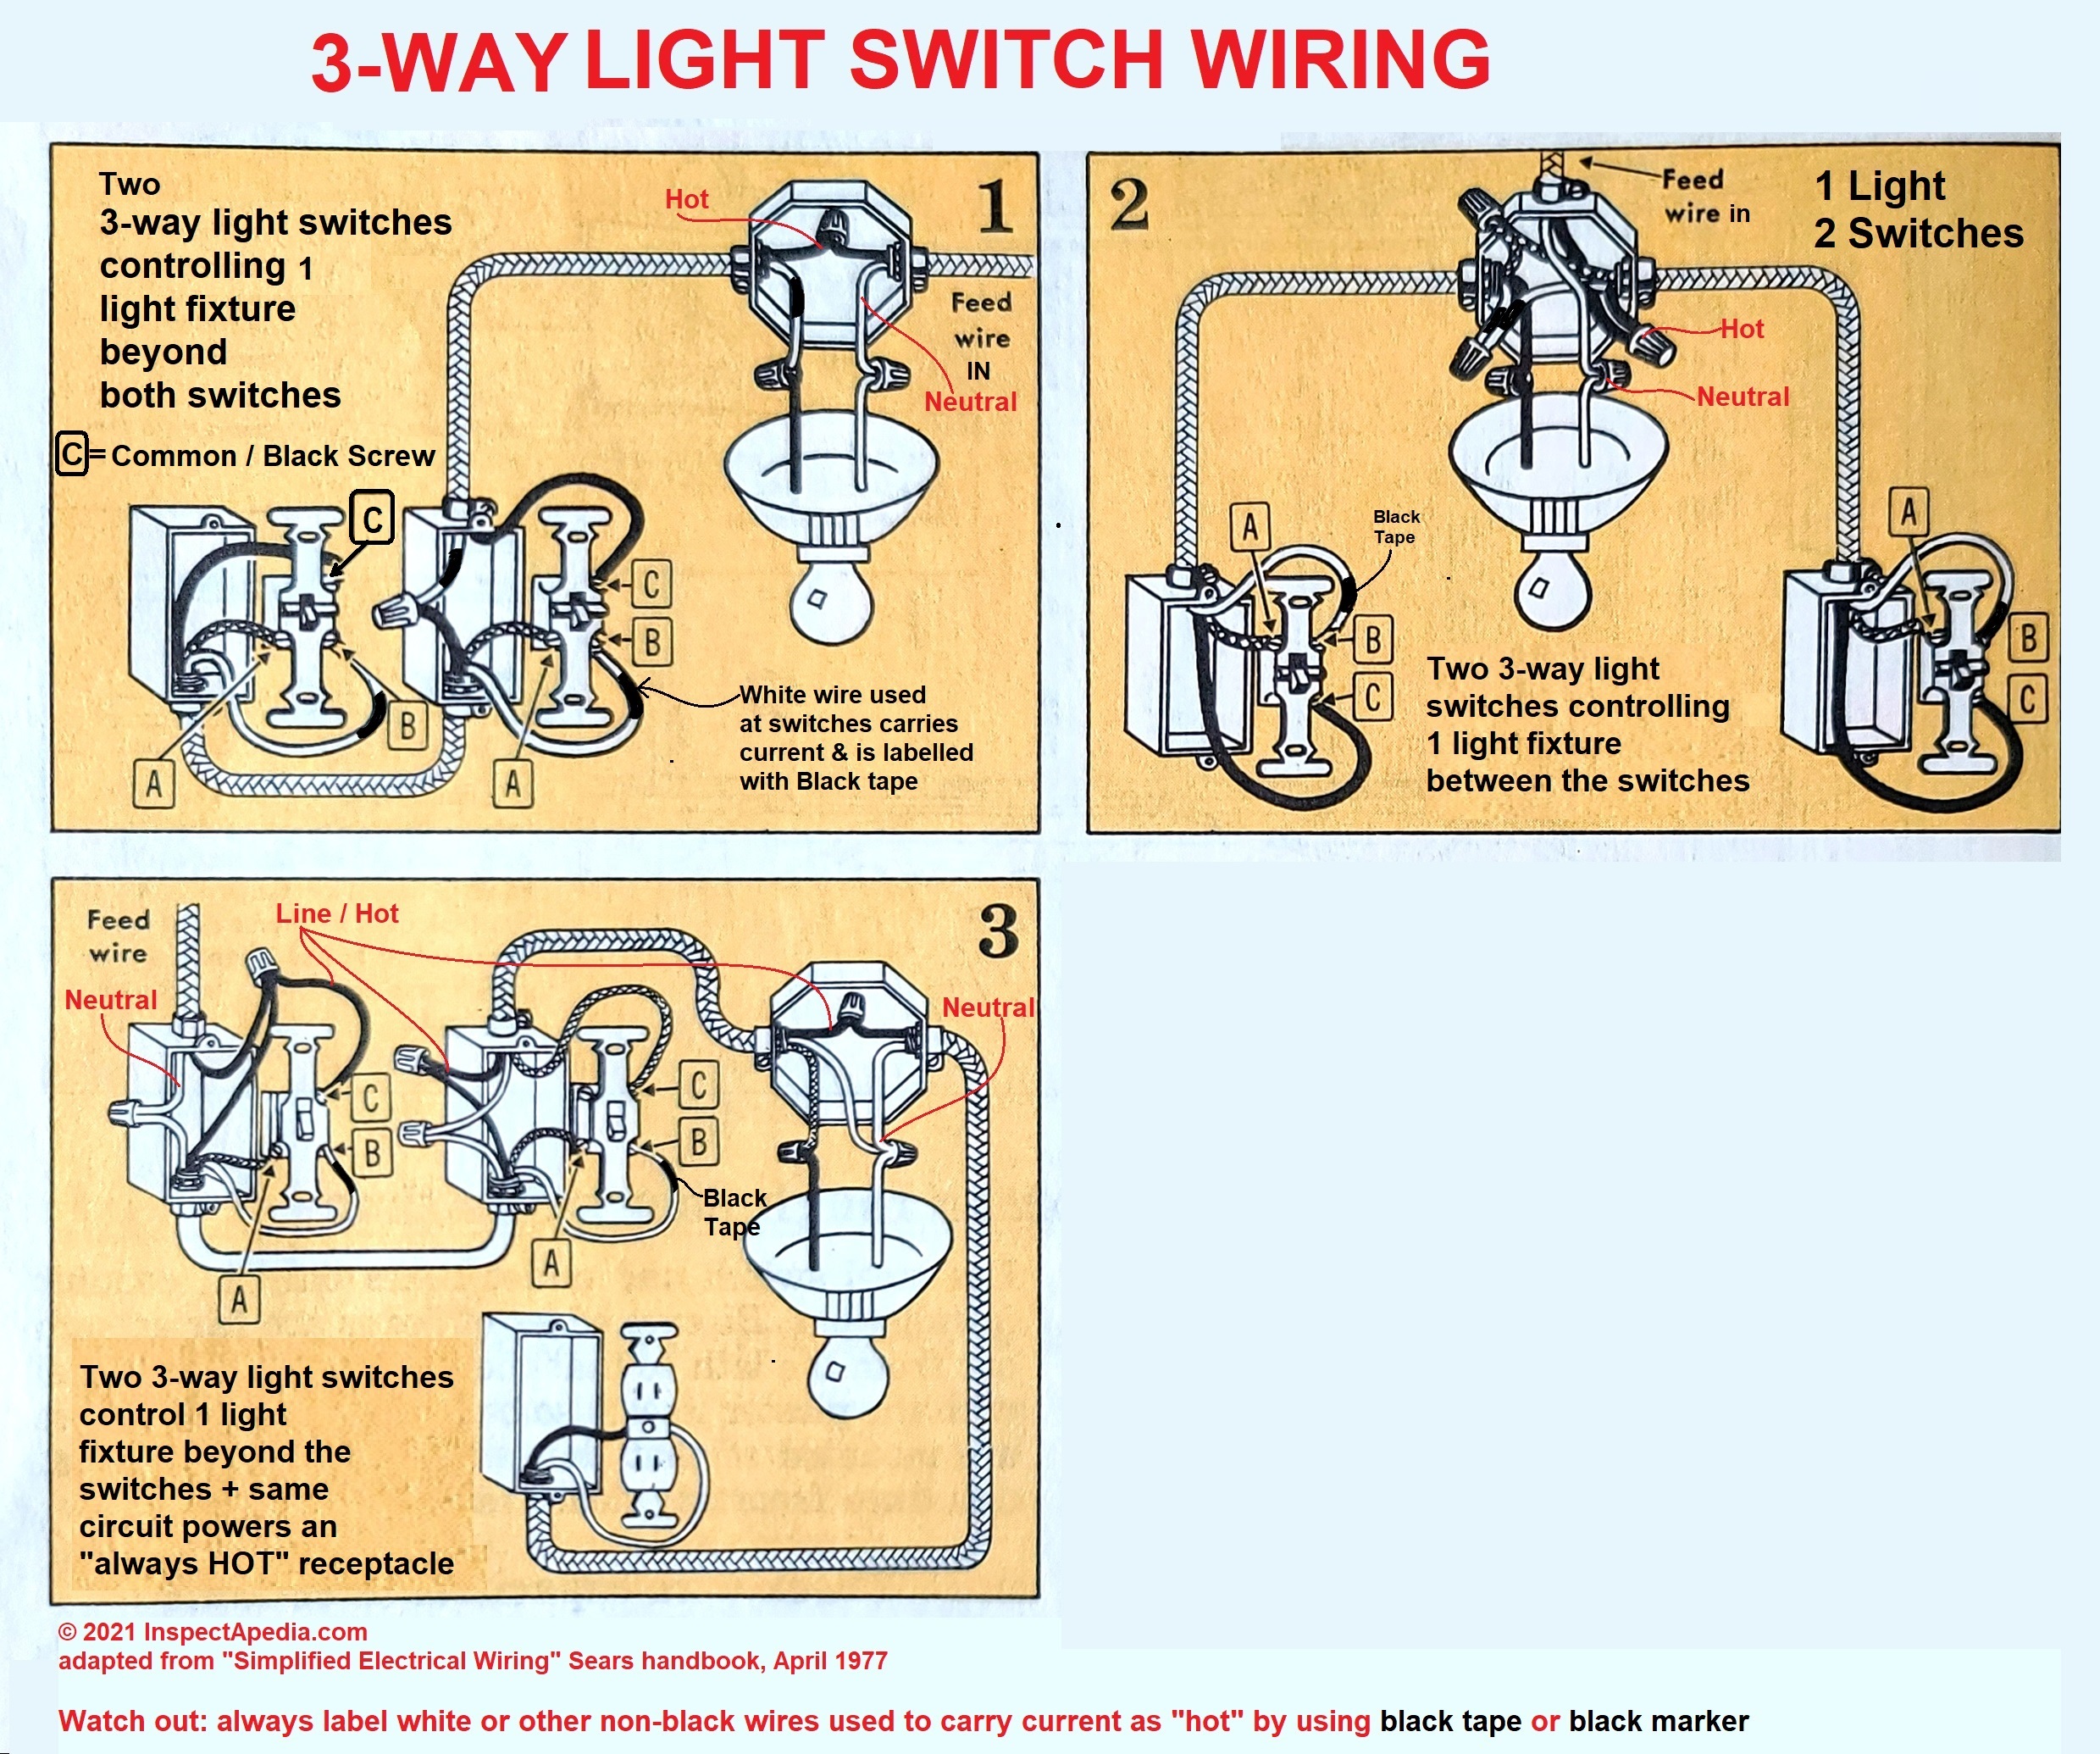 How To Wire An Outlet Off A 3 Way Switch How to wire a light switch: simple switch, 3-way light switch, 4-way light switch  wiring